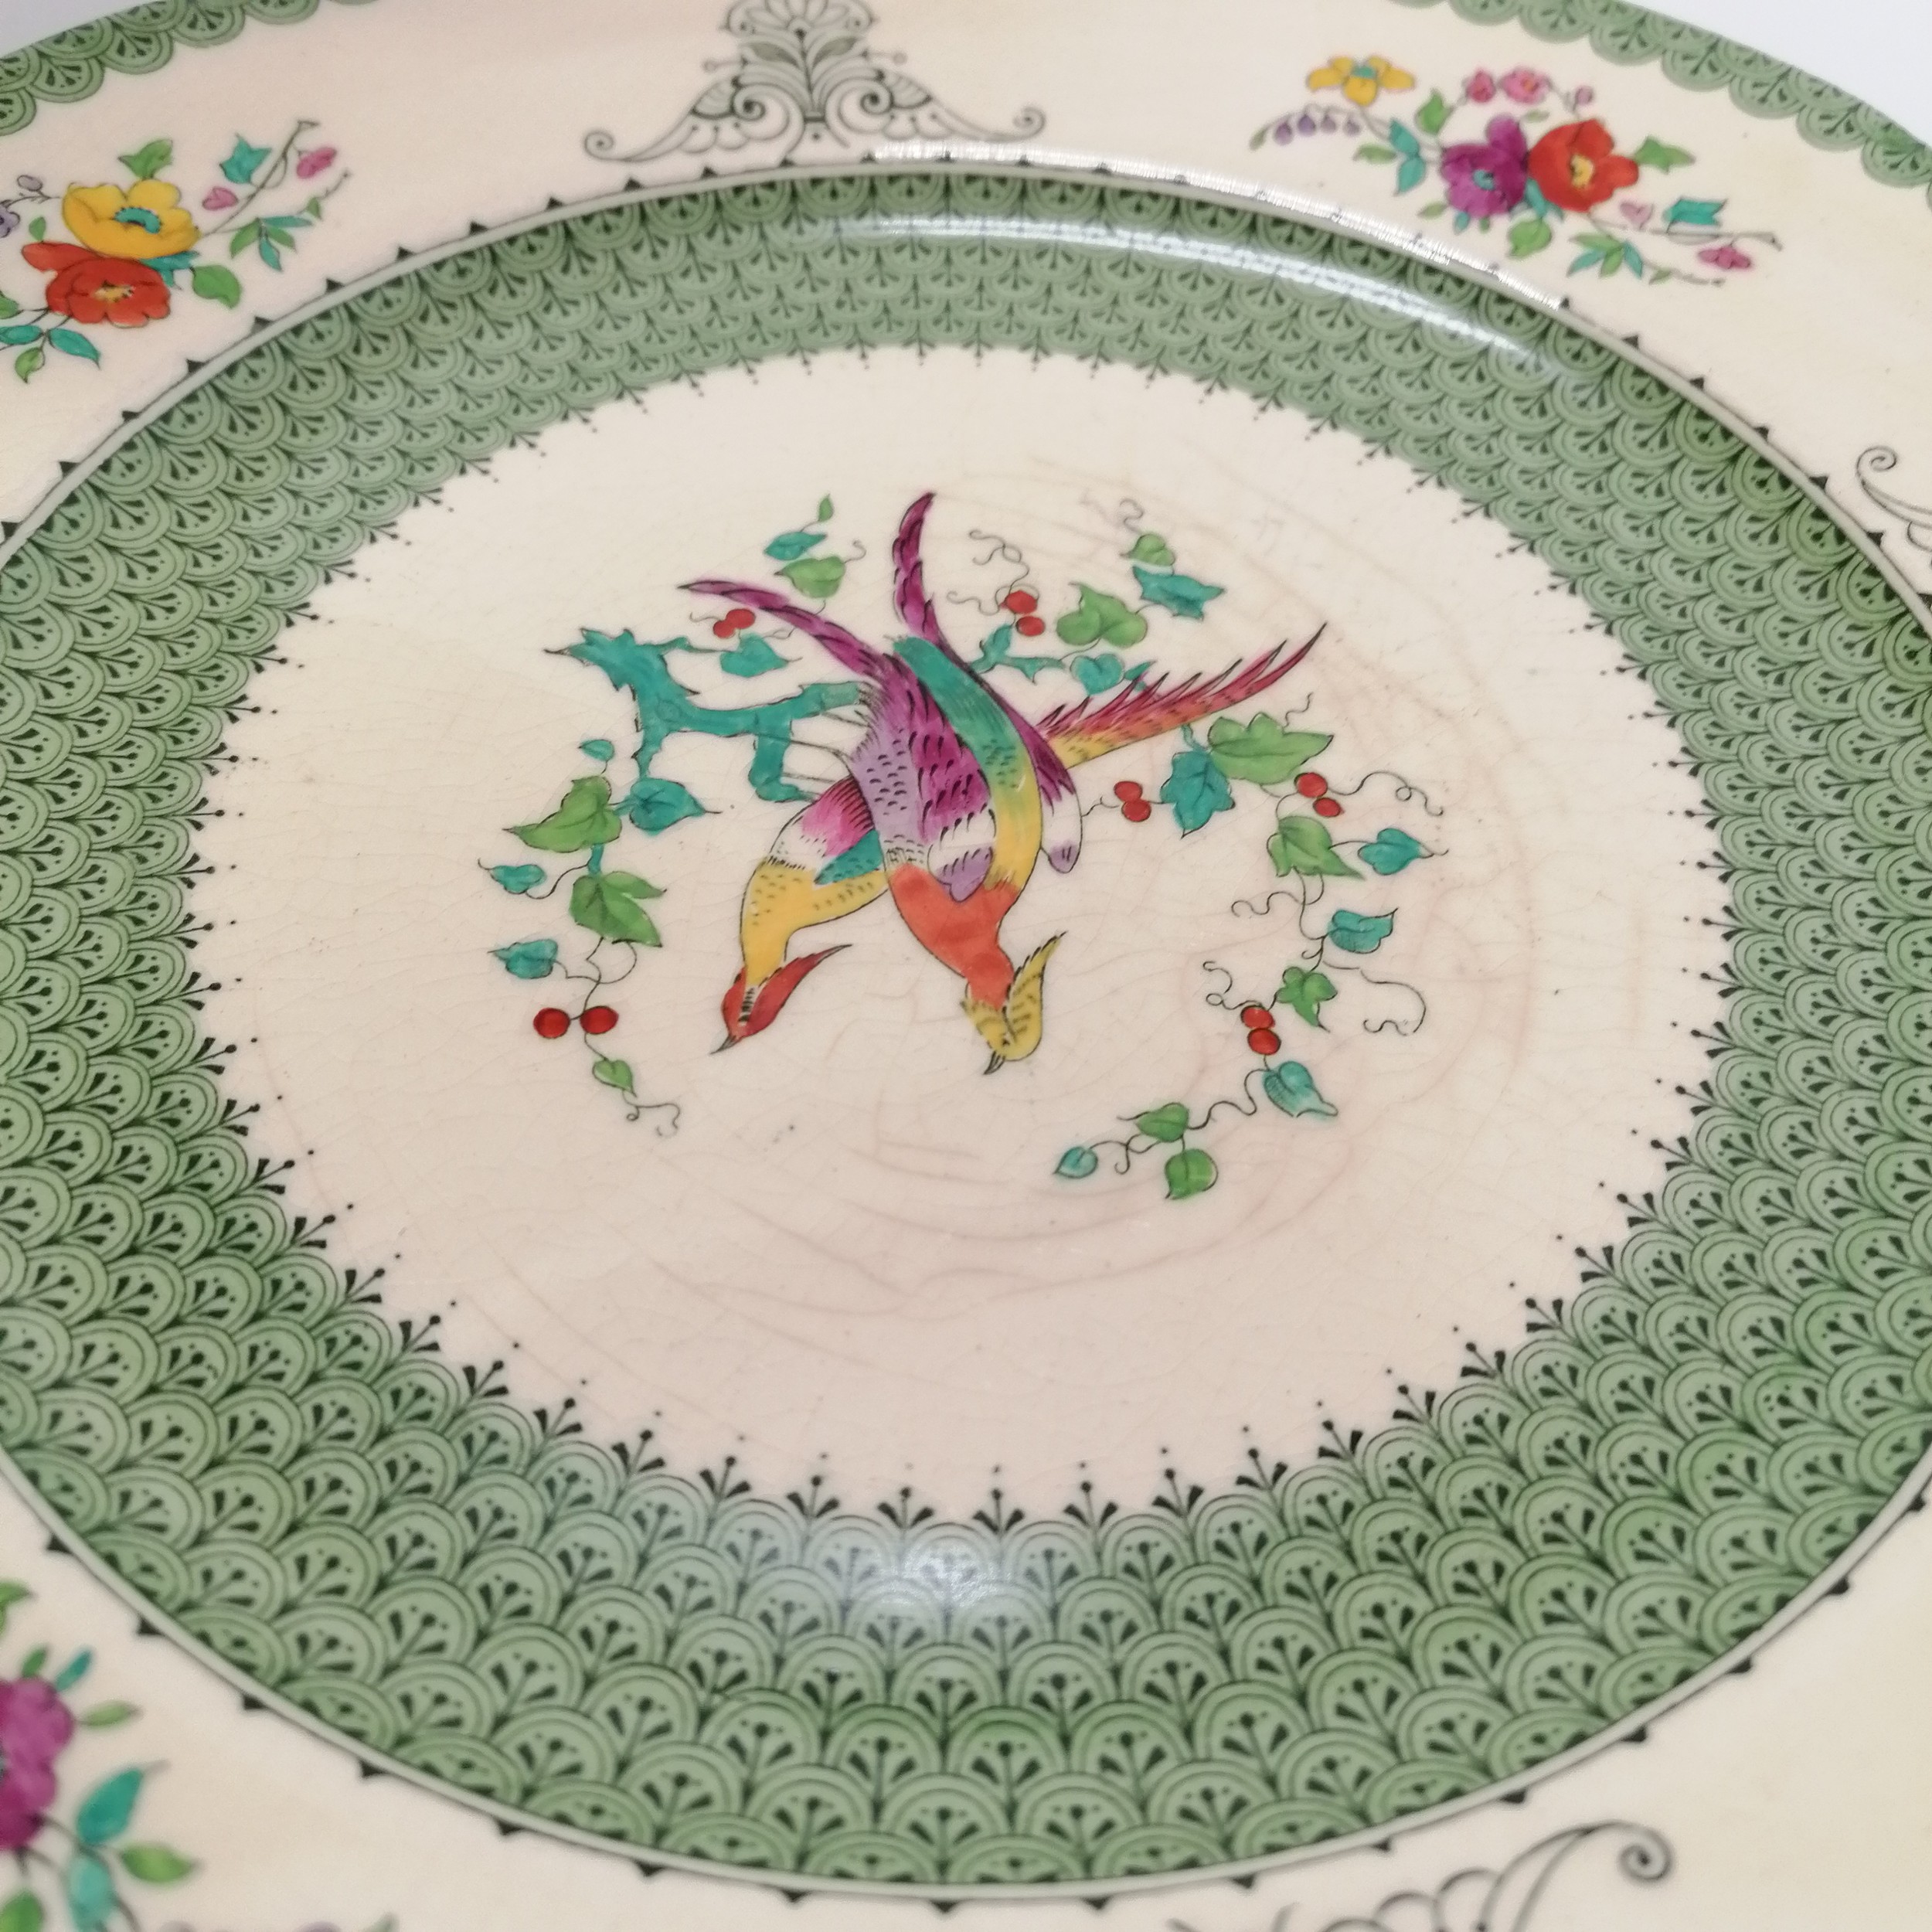 Royal cauldon "exotic birds" 6 dinner plates, 6 side plates, 2 serving dishes etc Condition - Image 3 of 3